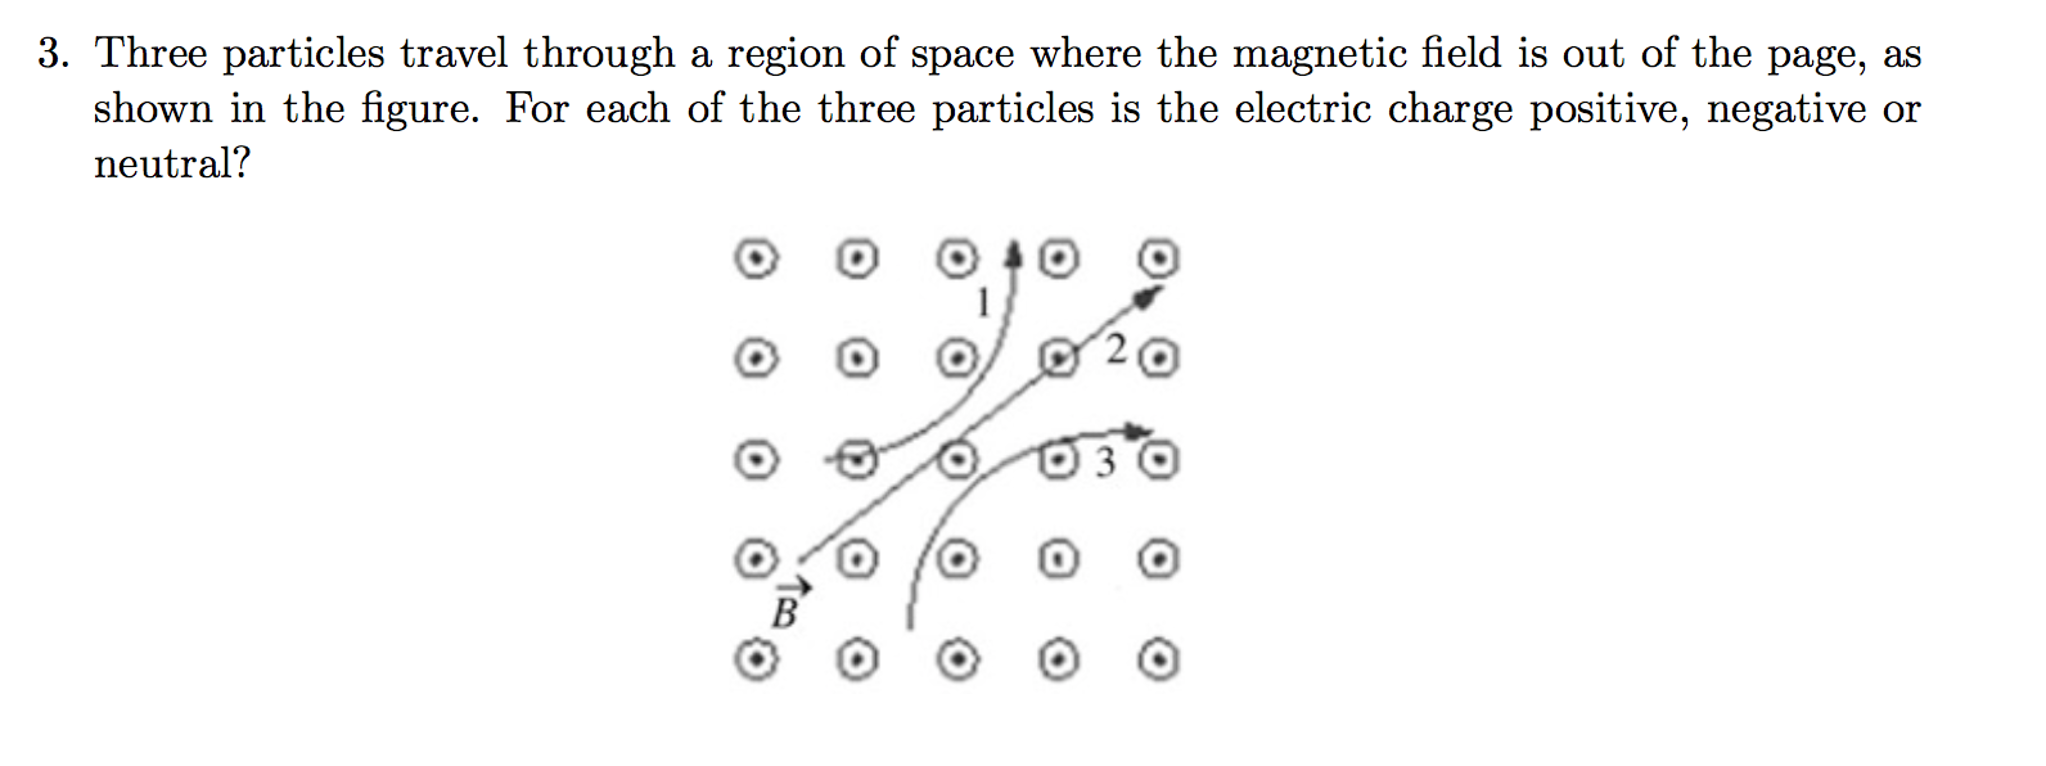 three particles travel through a region of space